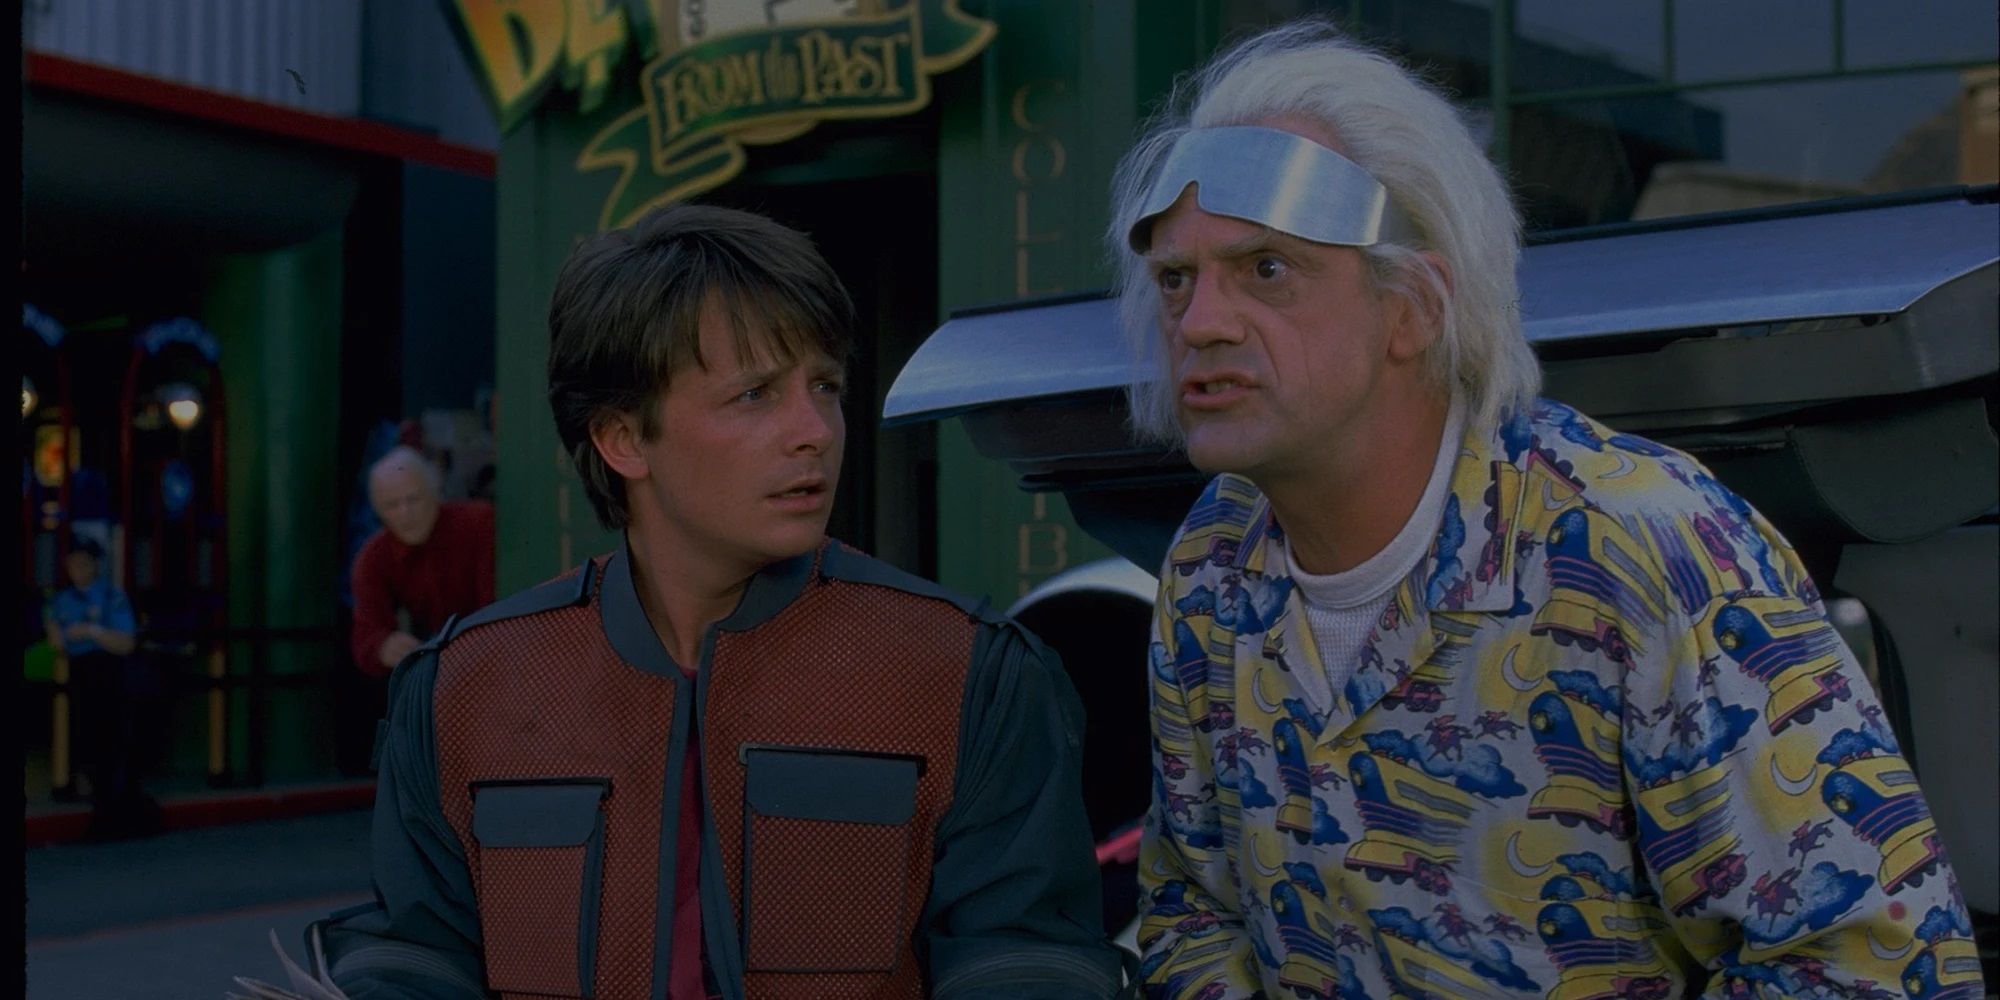 Back To The Future Sequels 5 Things They Got Right (& 5 That Missed The Mark)